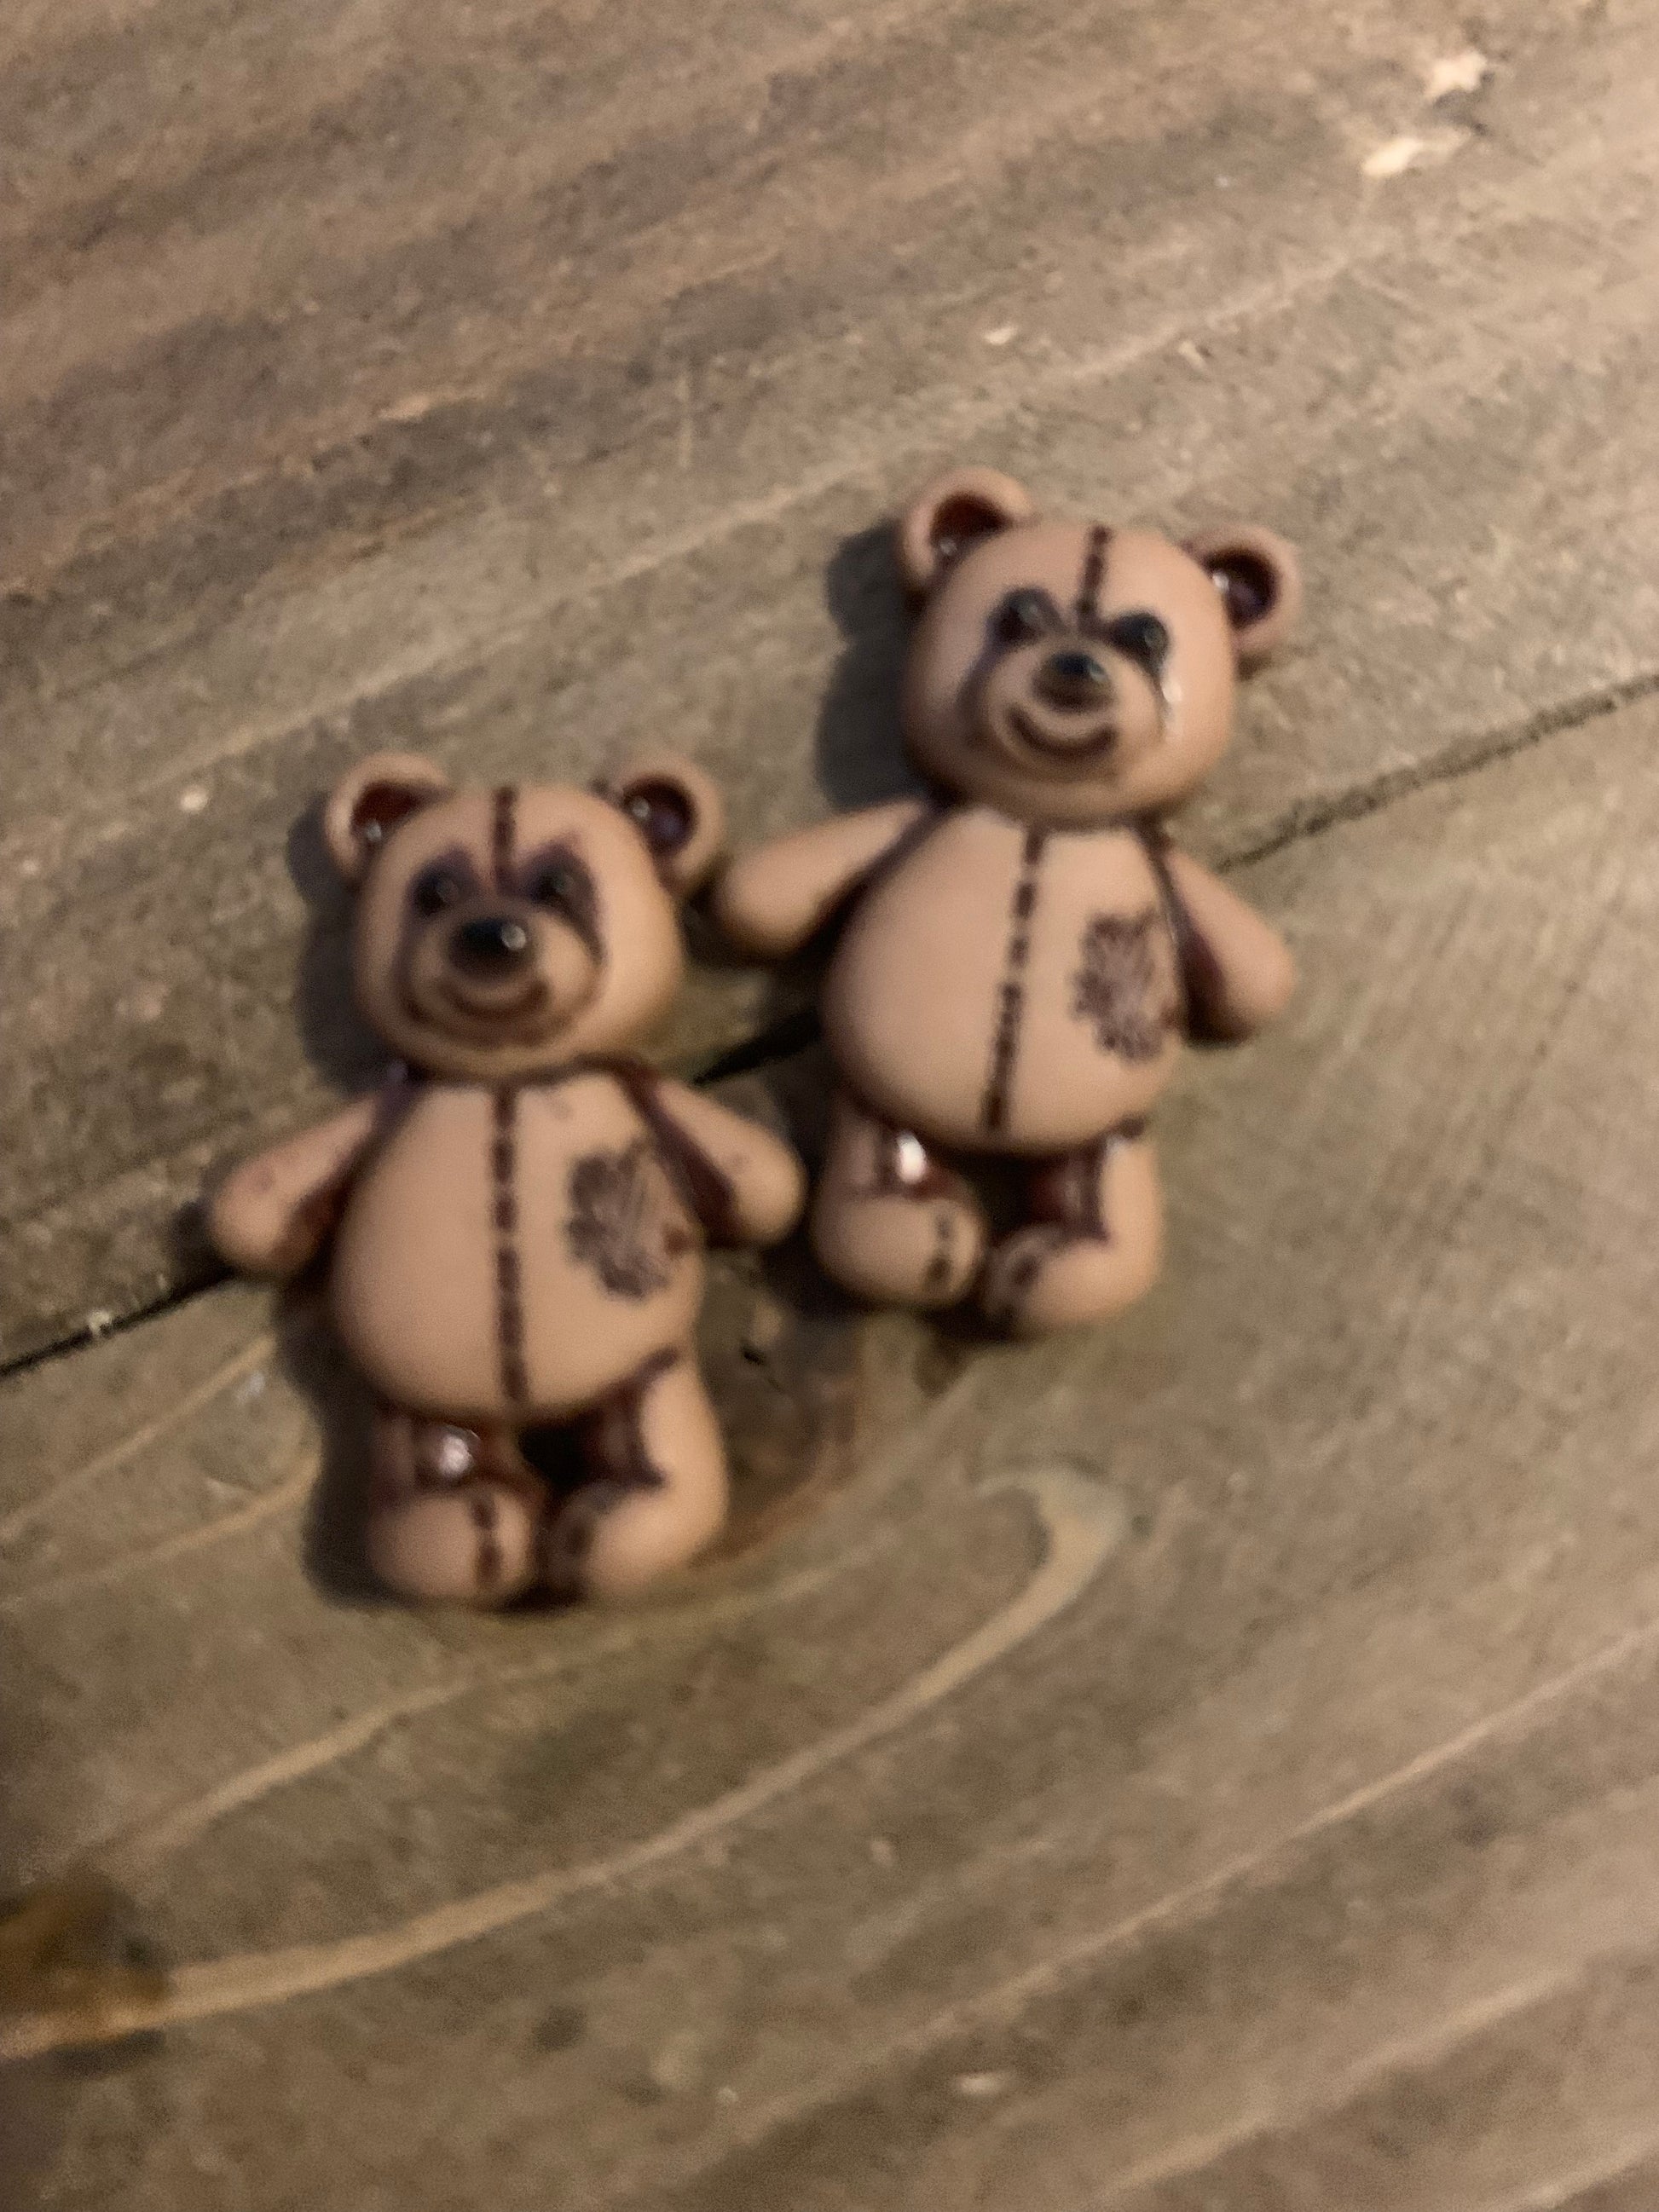 Cute, Cuddly Bear Earrings (5 to choose from)Pink tiful of LOVE